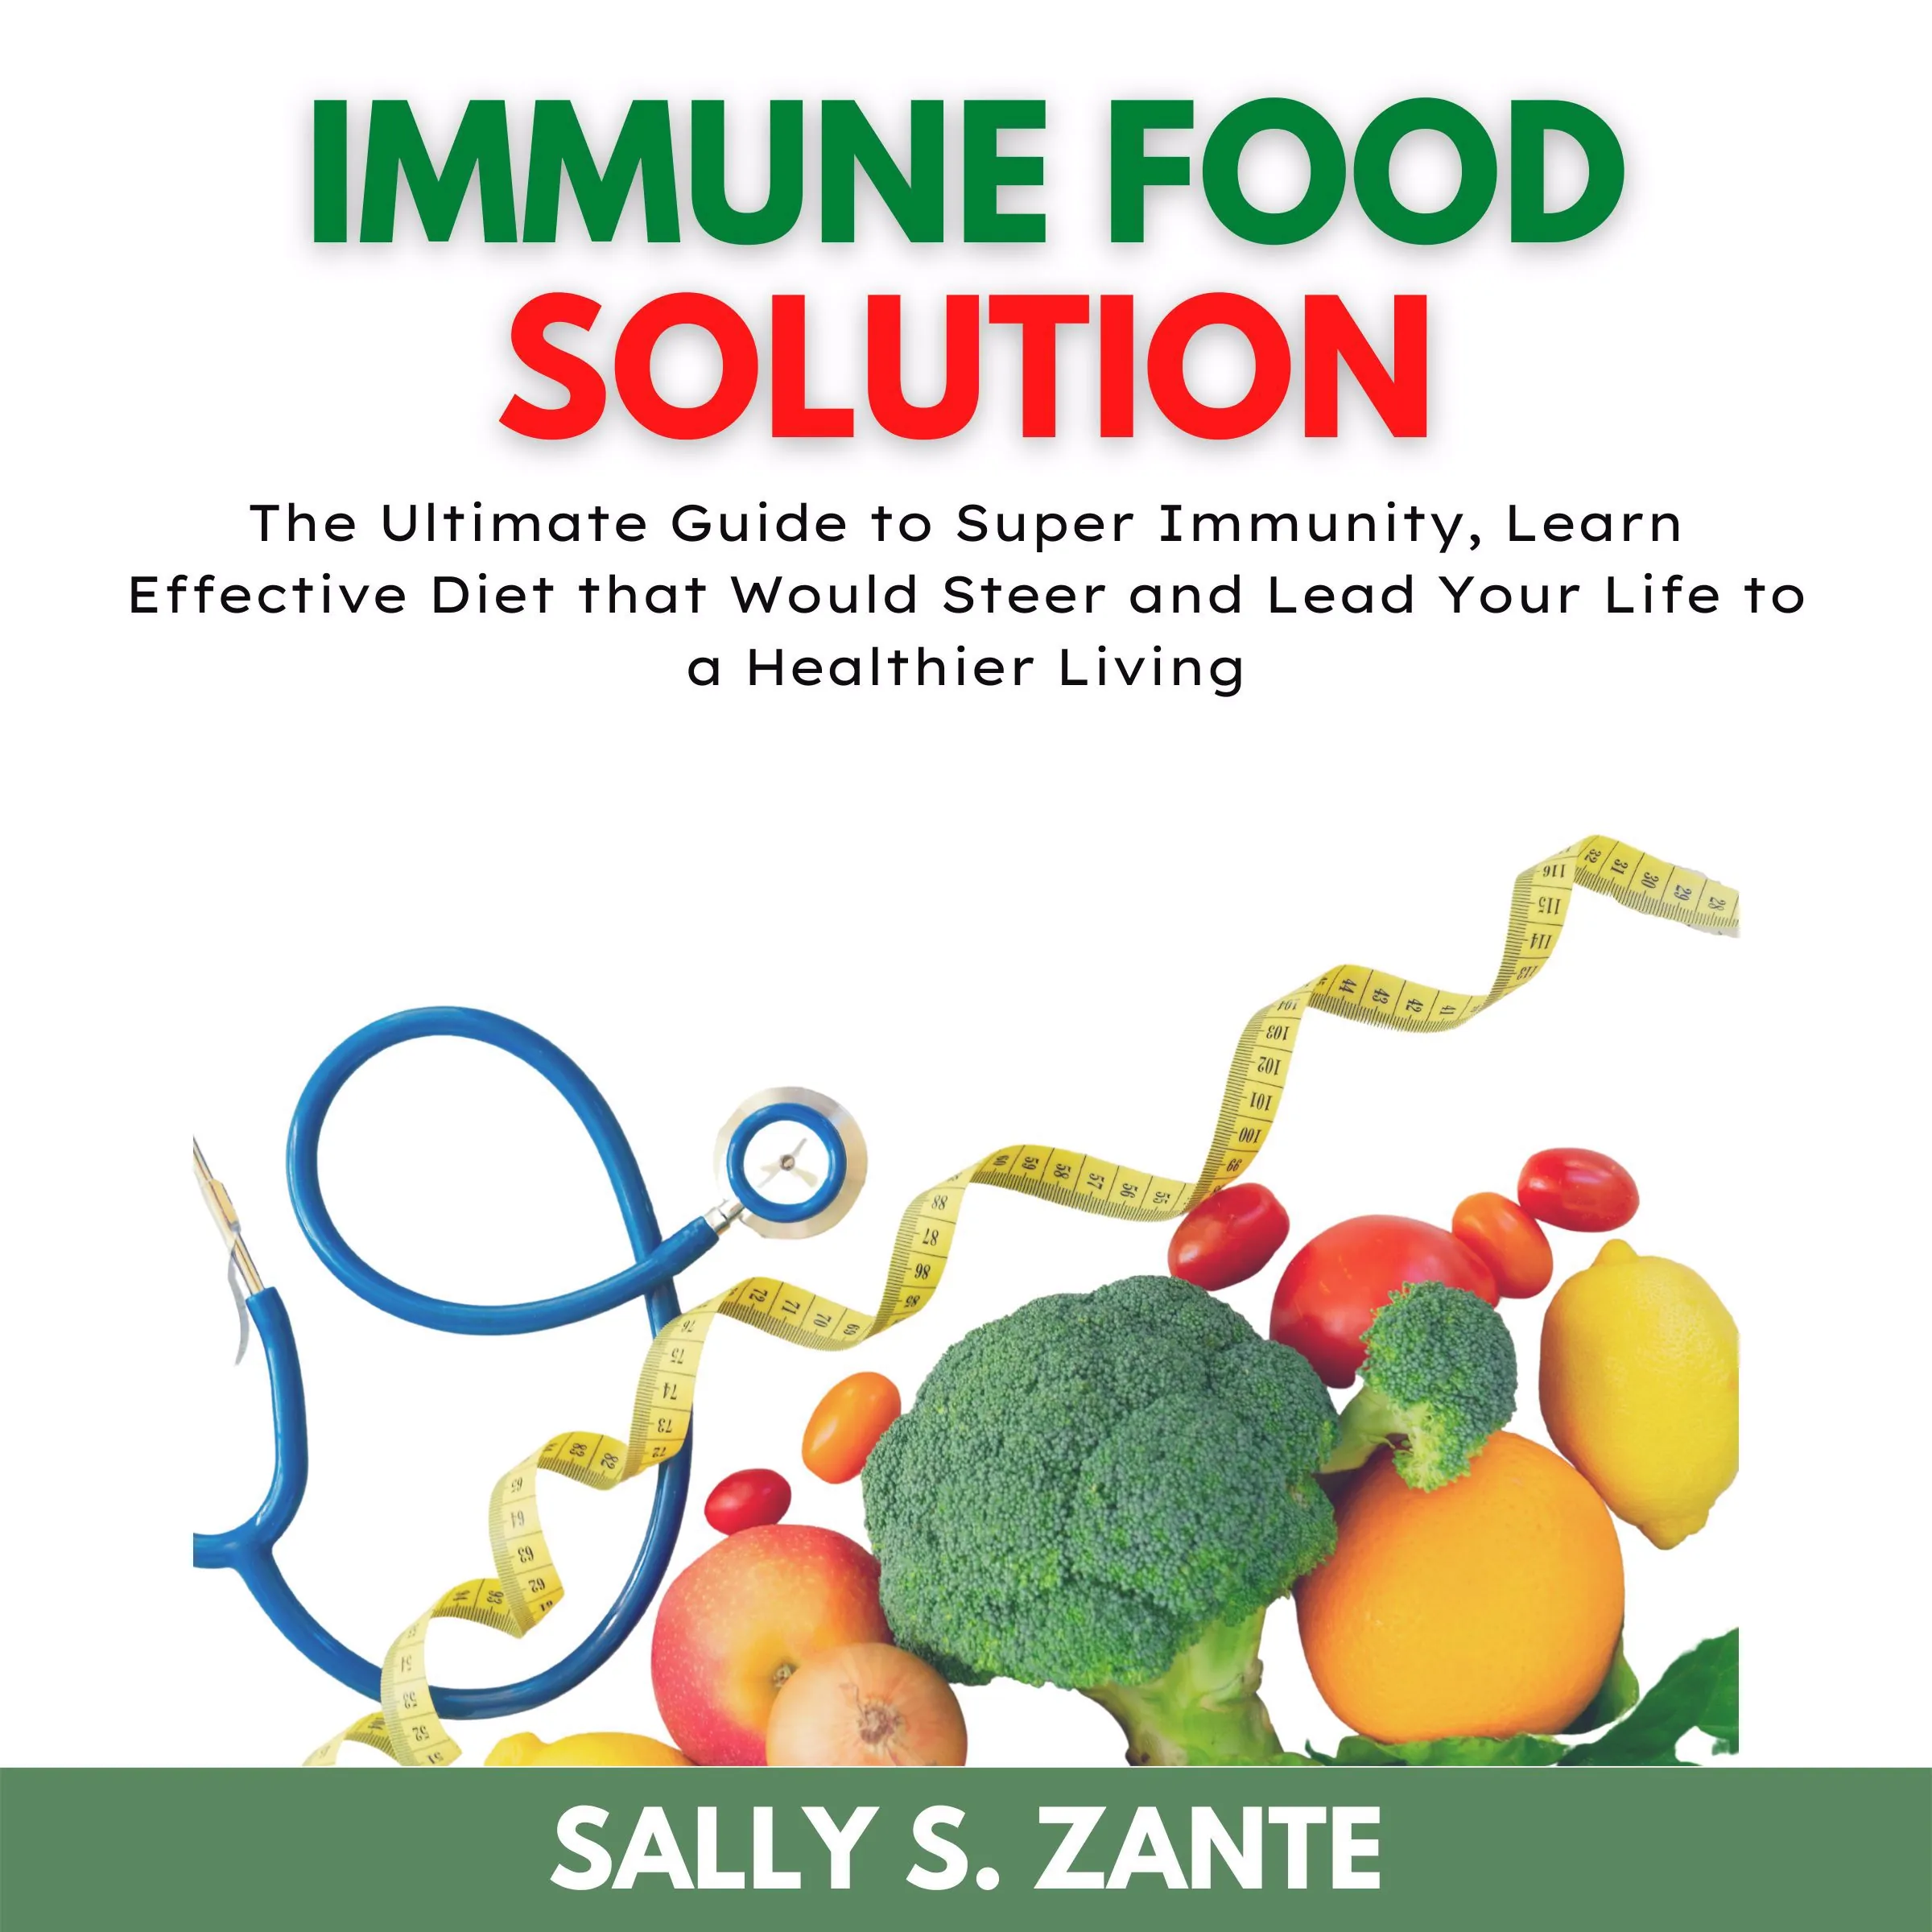 Immune Food Solution Audiobook by Sally S. Zante